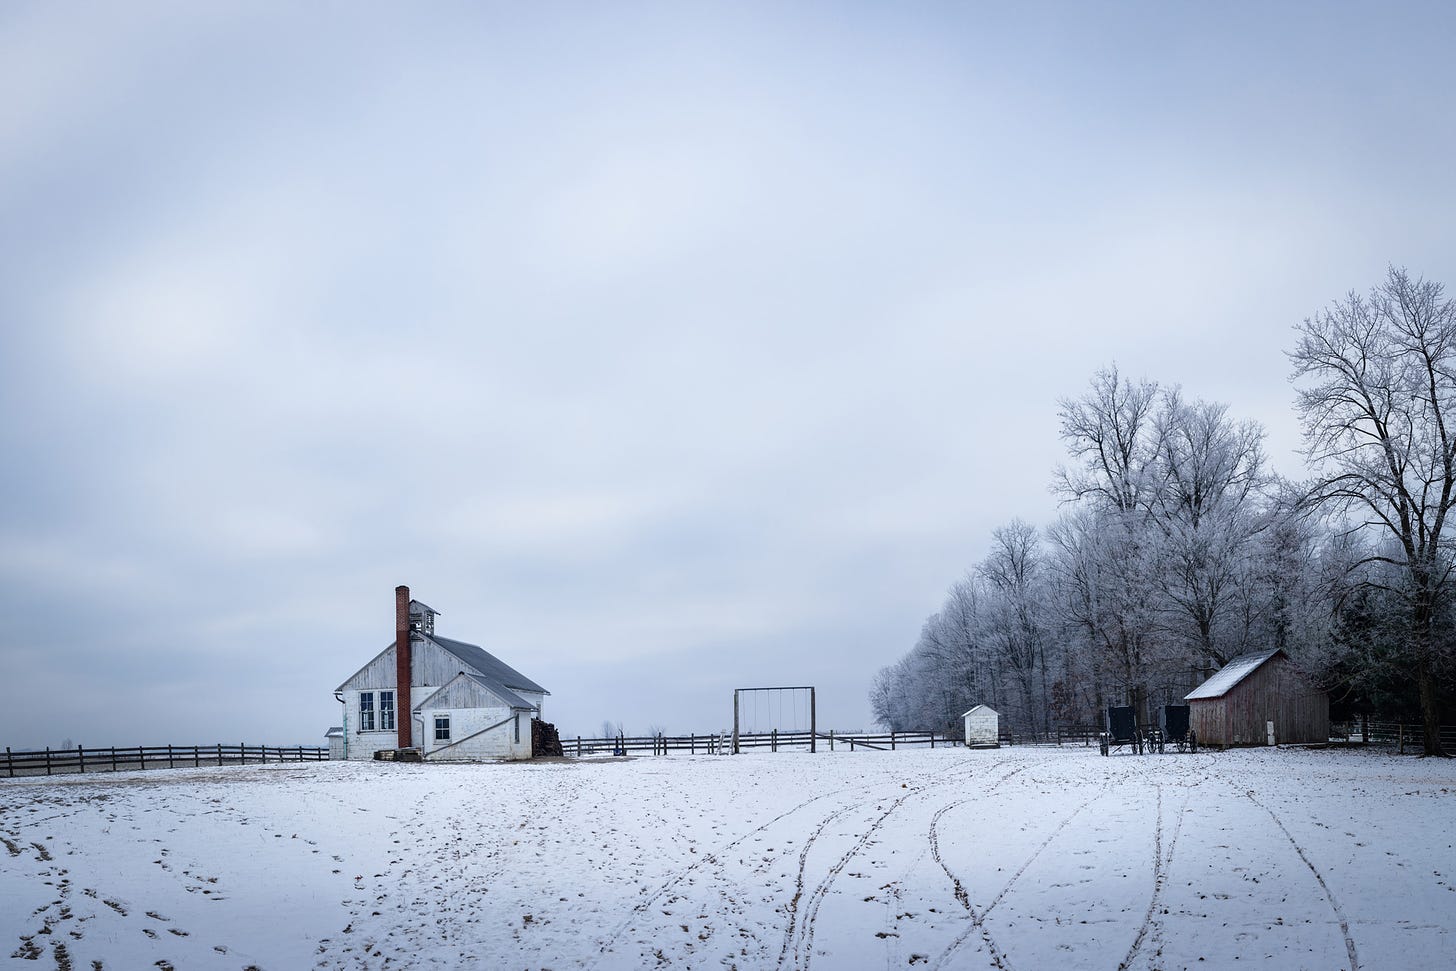 An Amish Schoolhouse in the Snow, used for their 8 grades of education